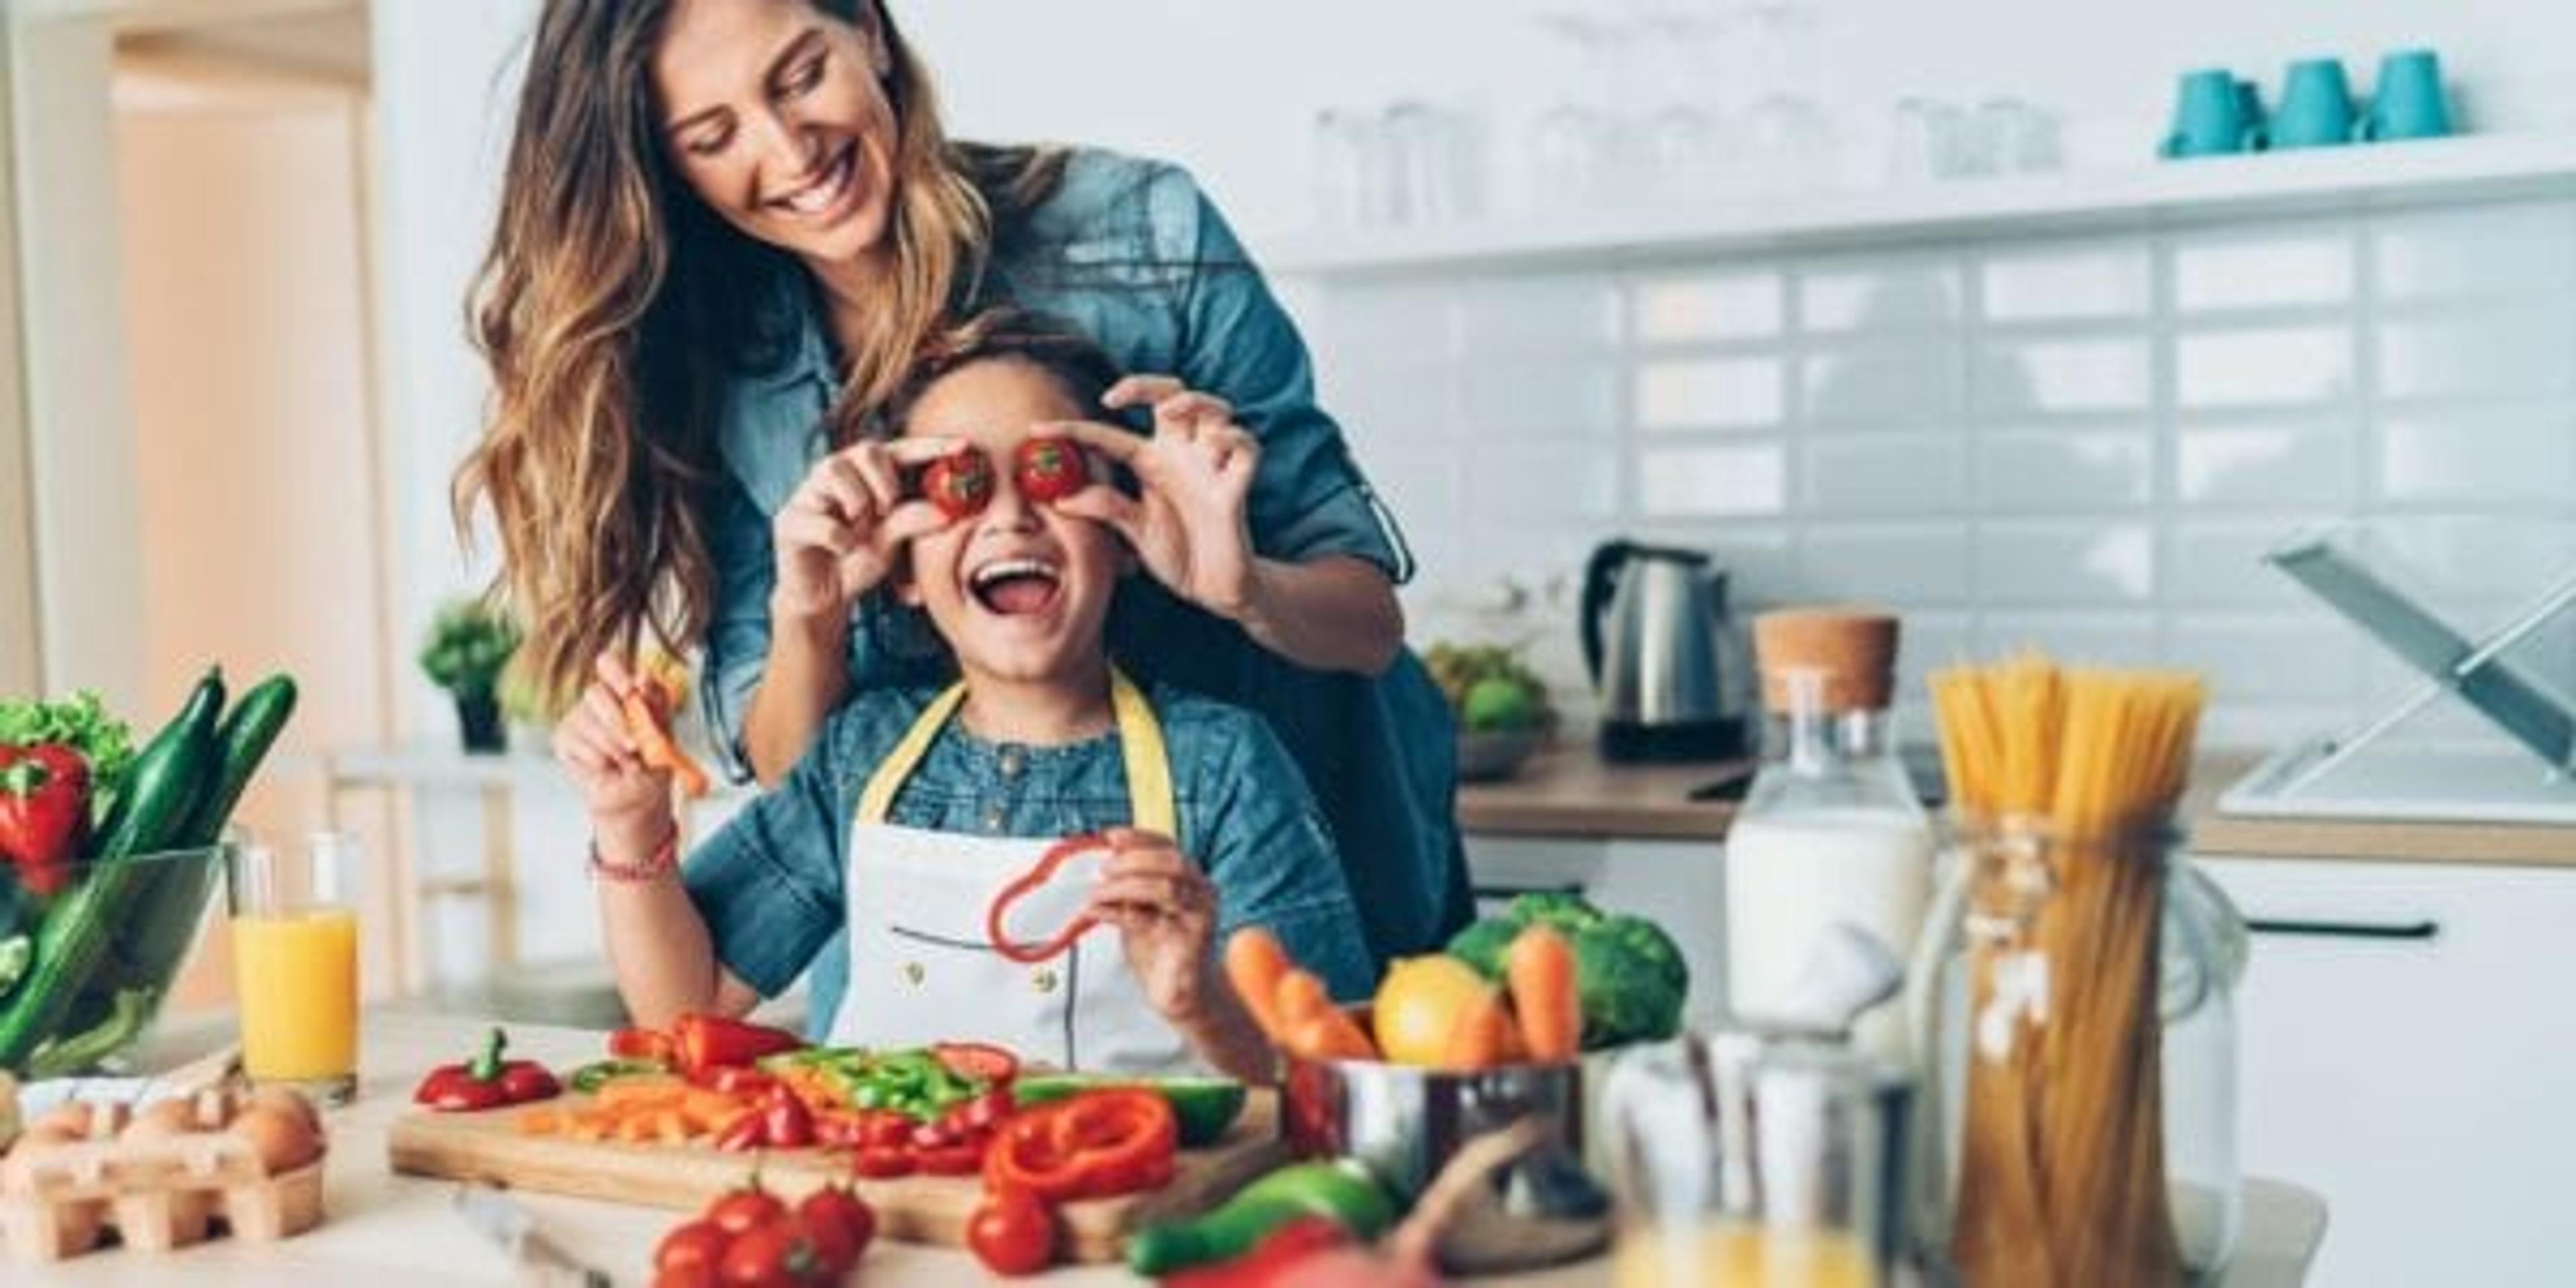 Woman preparing healthy food with her daughter